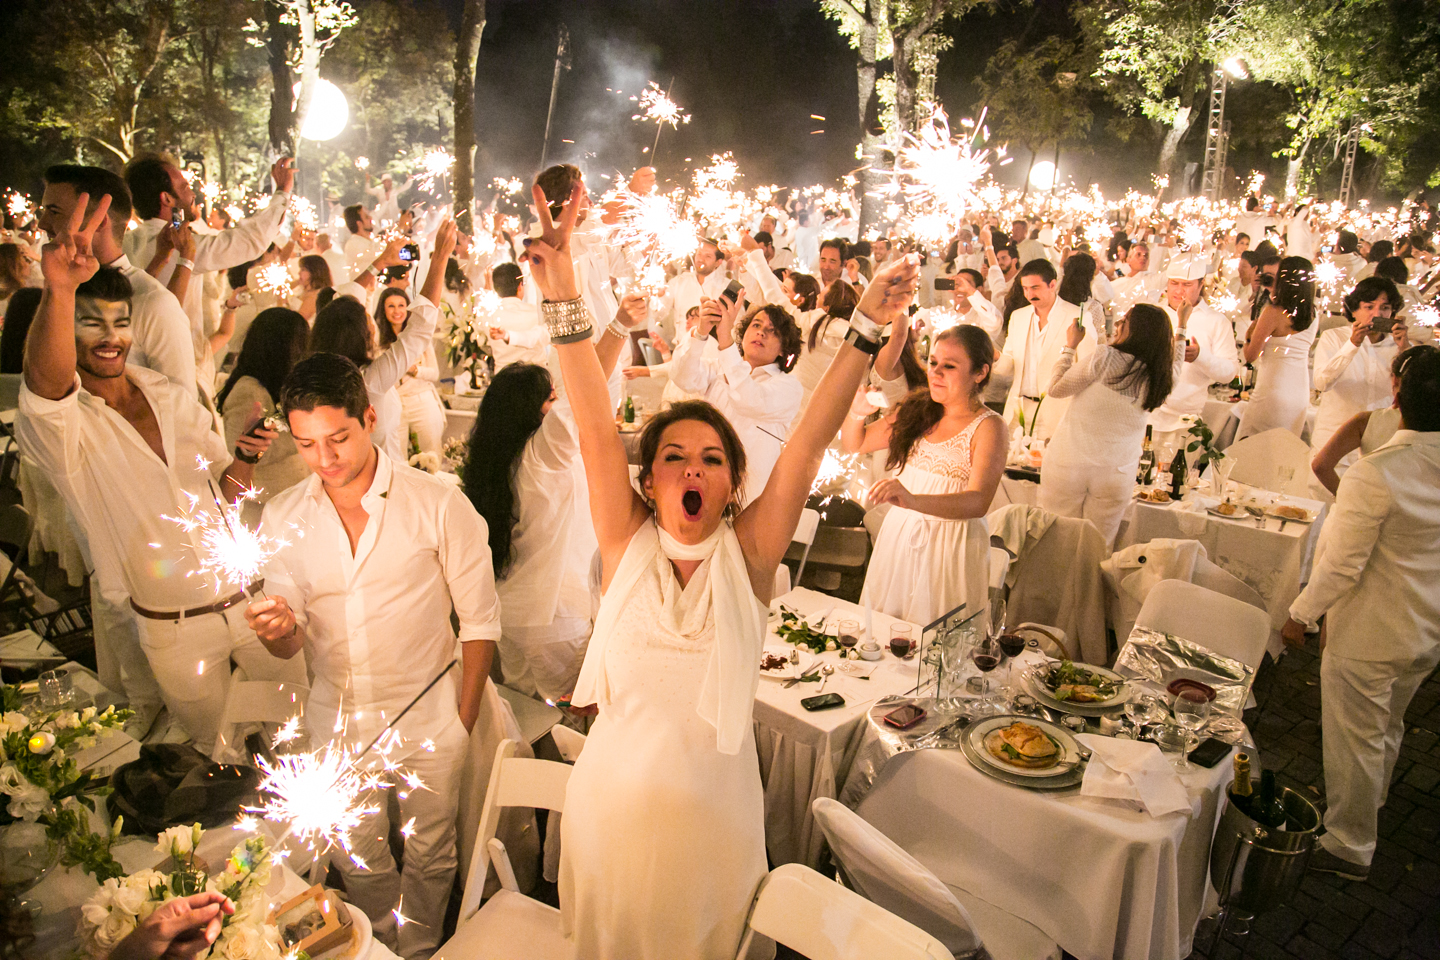 Guests in white hold up sparklers, express excitement.